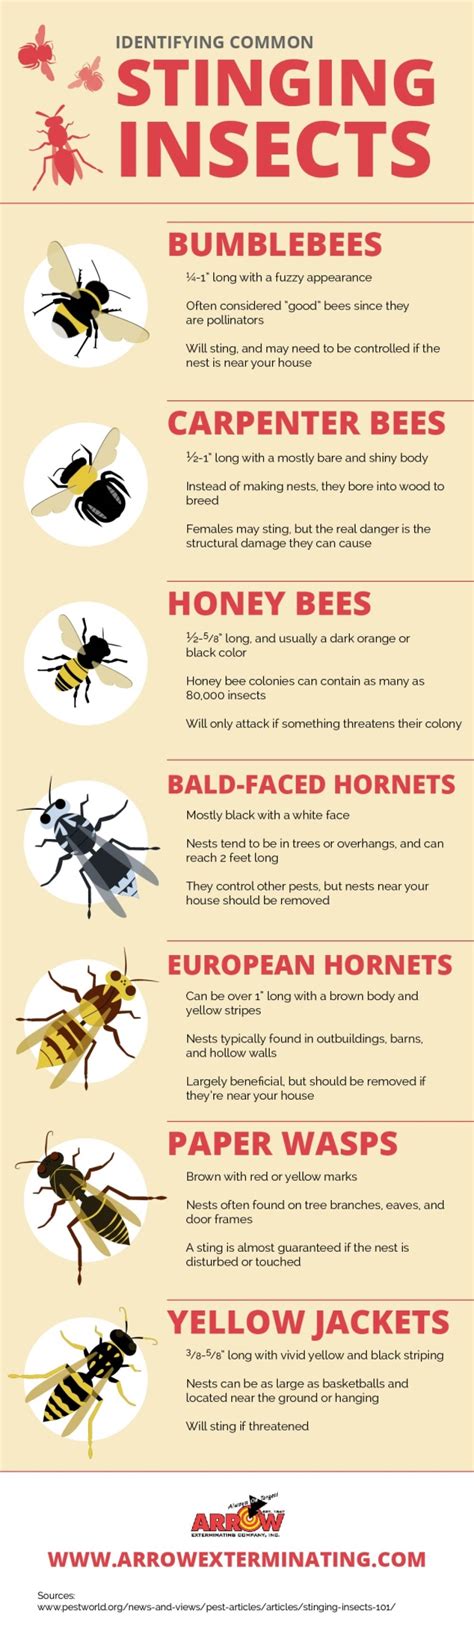 Stinging Insects Come In Many Shapes And Sizes Click Over To This